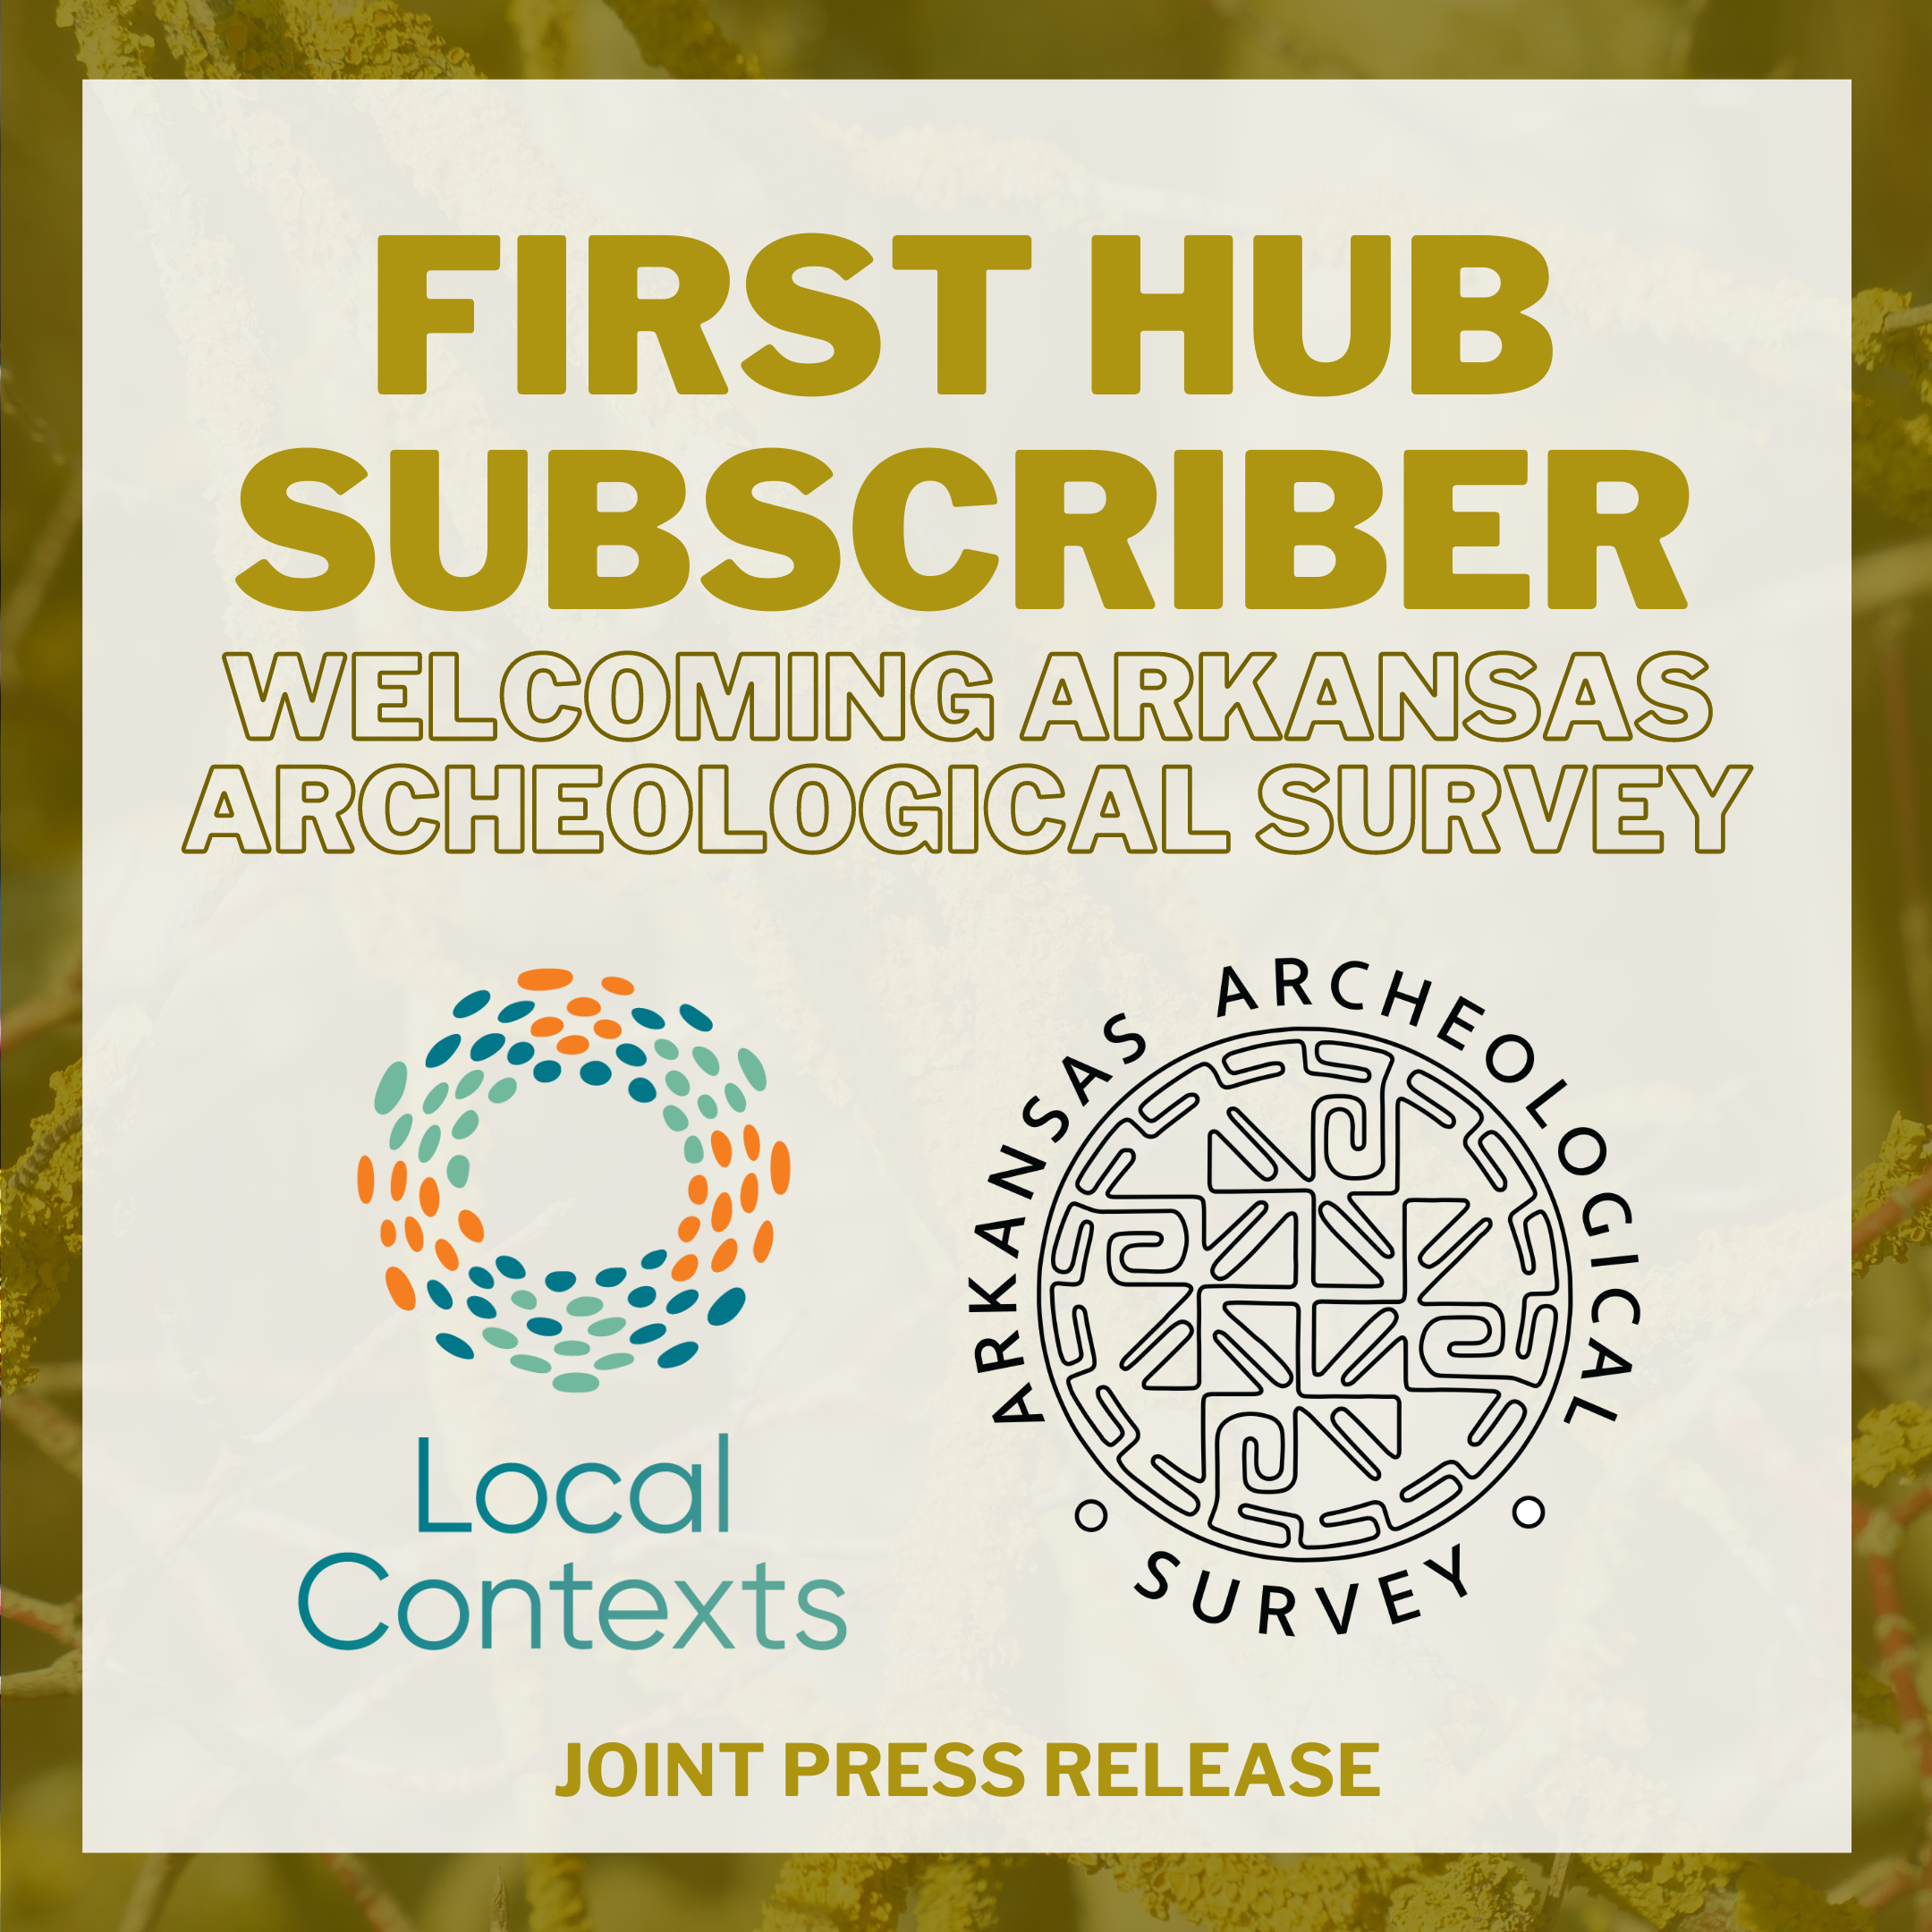 “First Hub subscriber. Welcoming Arkansas Archeological Survey. Joint Press release.” Logos for Local Contexts and Arkansas Archeological Survey. Decorative yellow background.